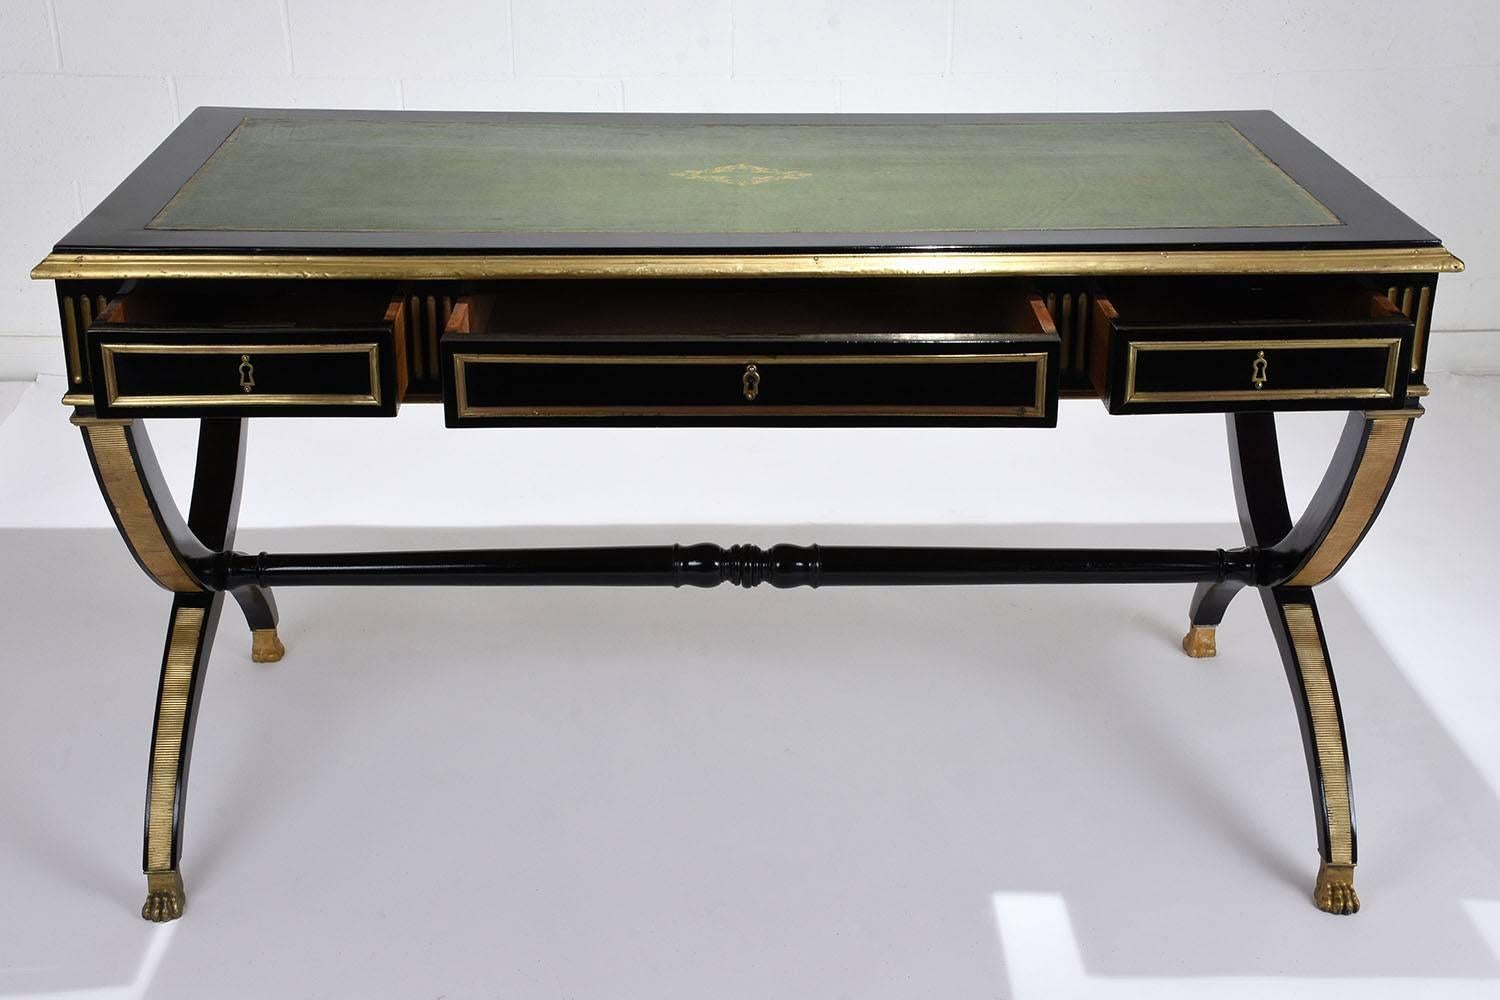 This 1900s French Empire-style desk is made of mahogany wood ebonized in a rich black color with a lacquered finish. The desk has two leaf extensions on either side that allow for a larger work space. Both the top and leaves are adorned with